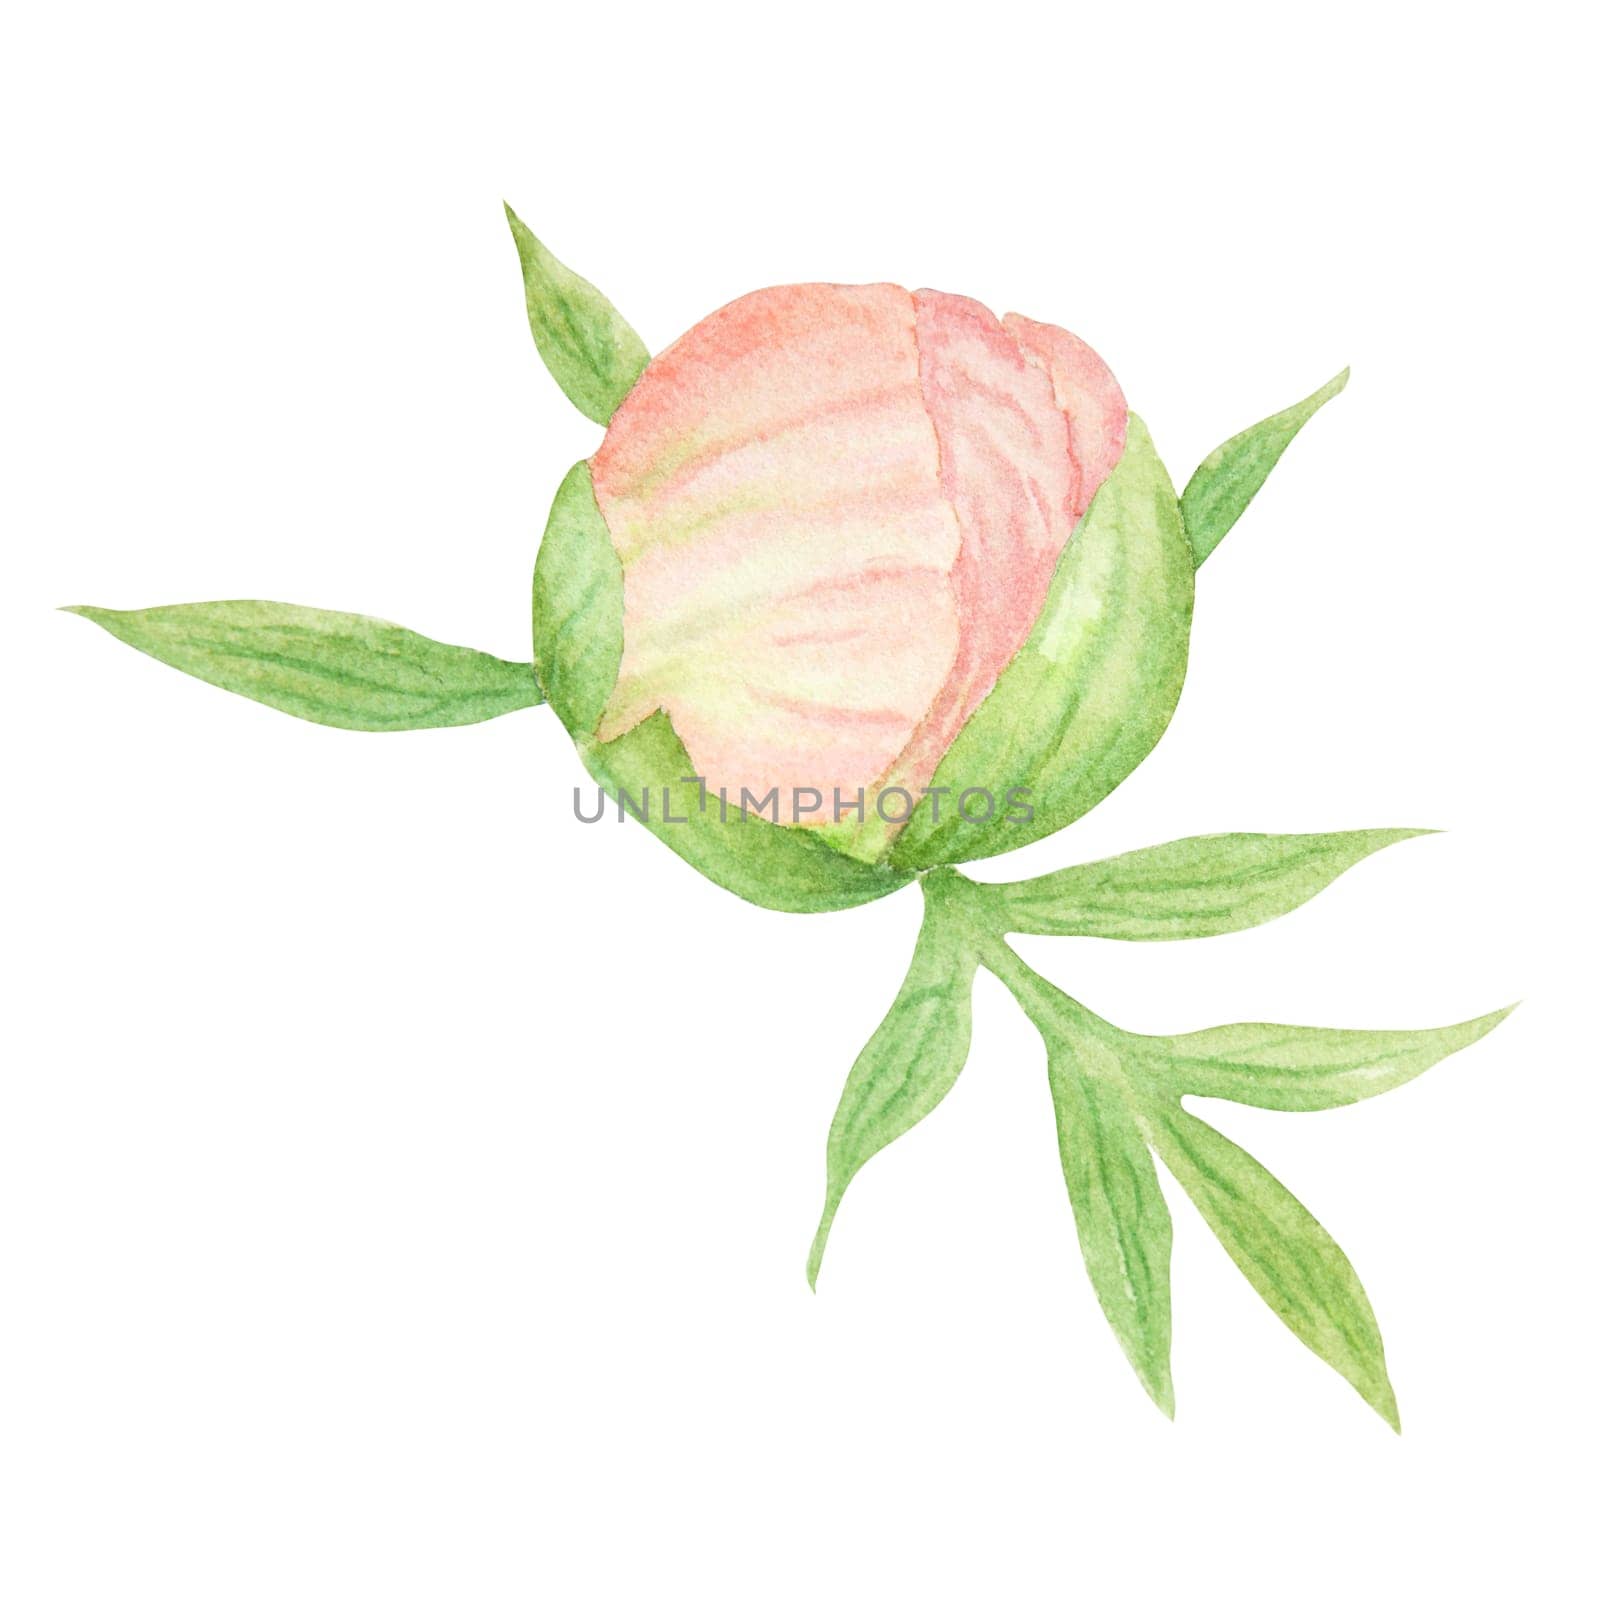 Peach peony bud watercolor hand drawn painting. Realistic flower clipart, floral arrangement. Chinese national symbol illustration. Perfect for card design, wedding invitation, prints, textile by florainlove_art